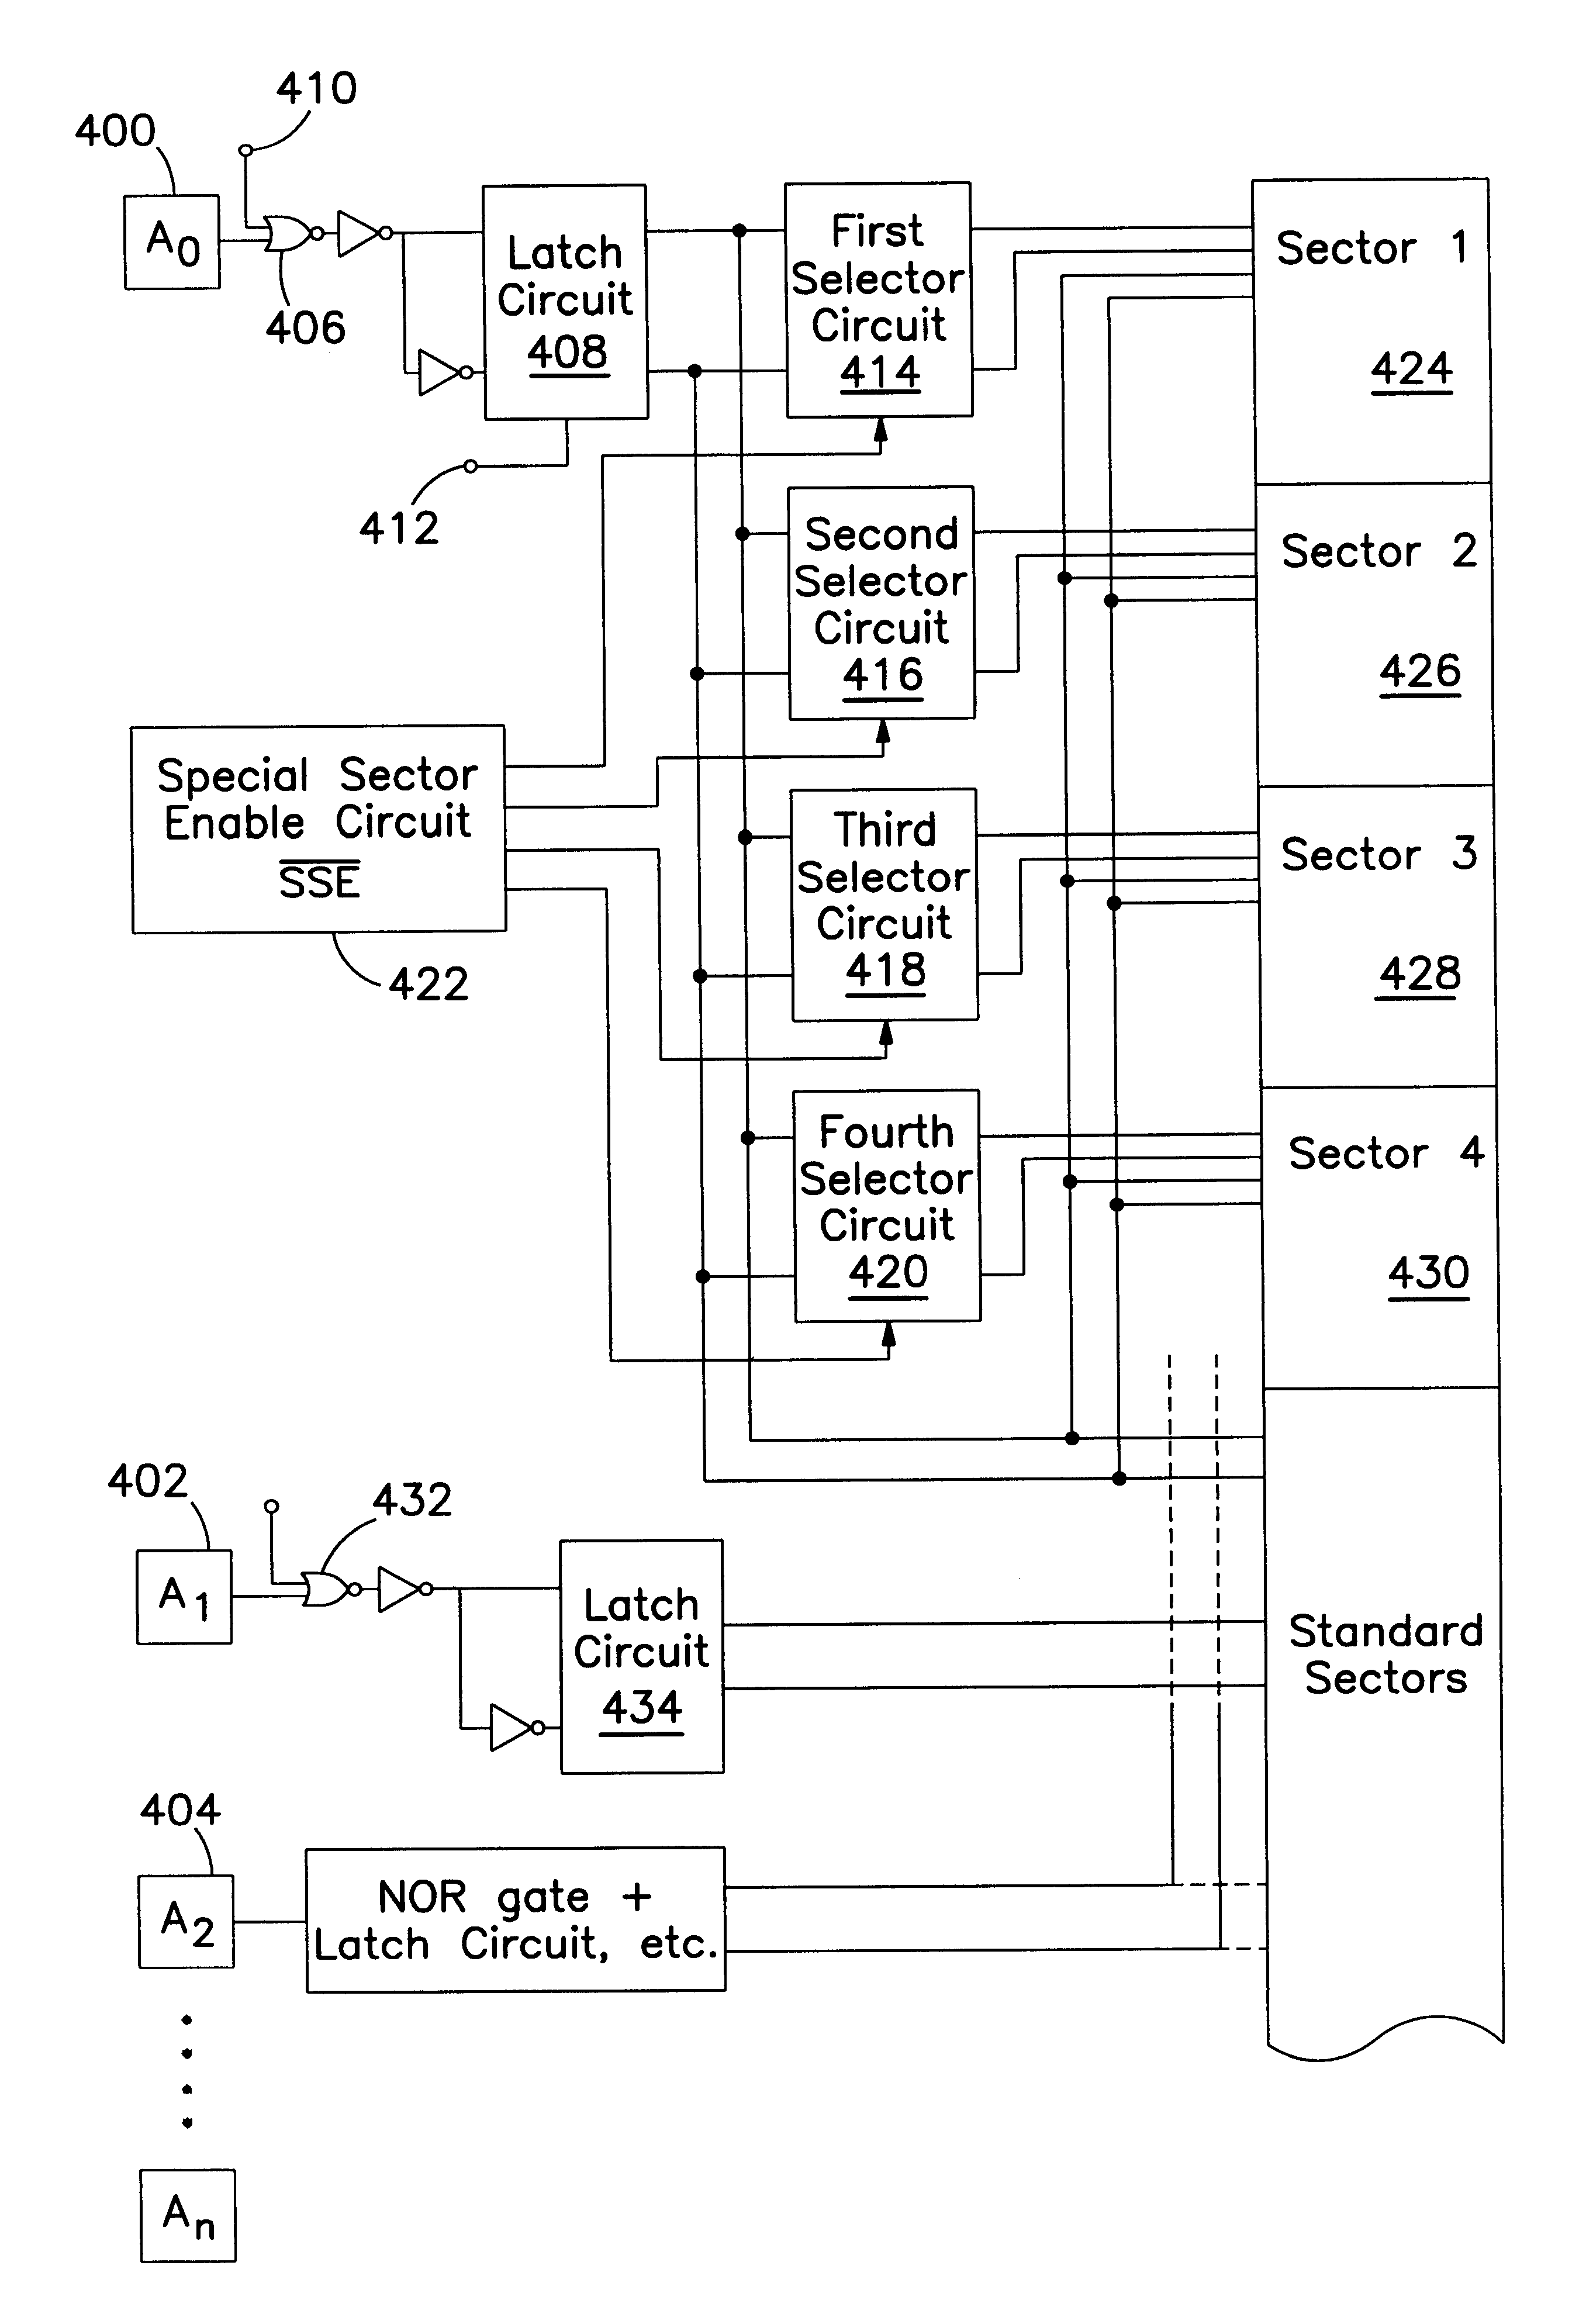 Nonvolatile memory device with extended storage and high reliability through writing the same data into two memory cells